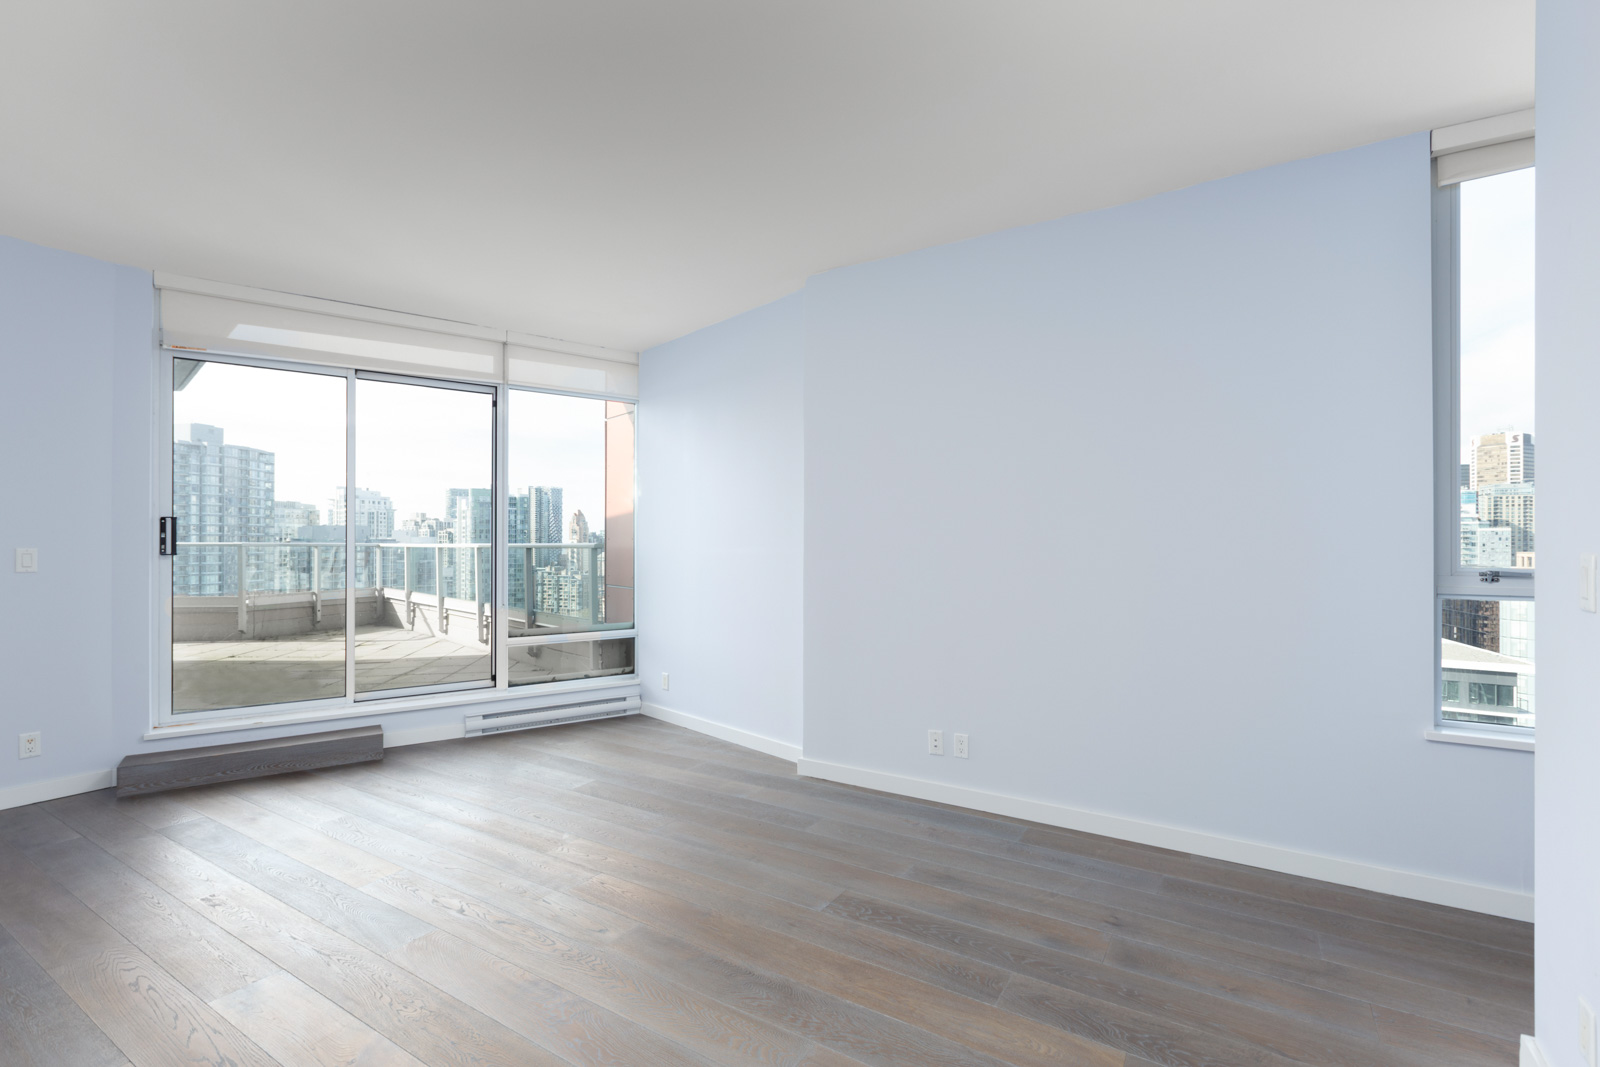 empty room with open floor to ceiling window with doors on the left in rental yaletown penthouse condo managed by birds nest properties